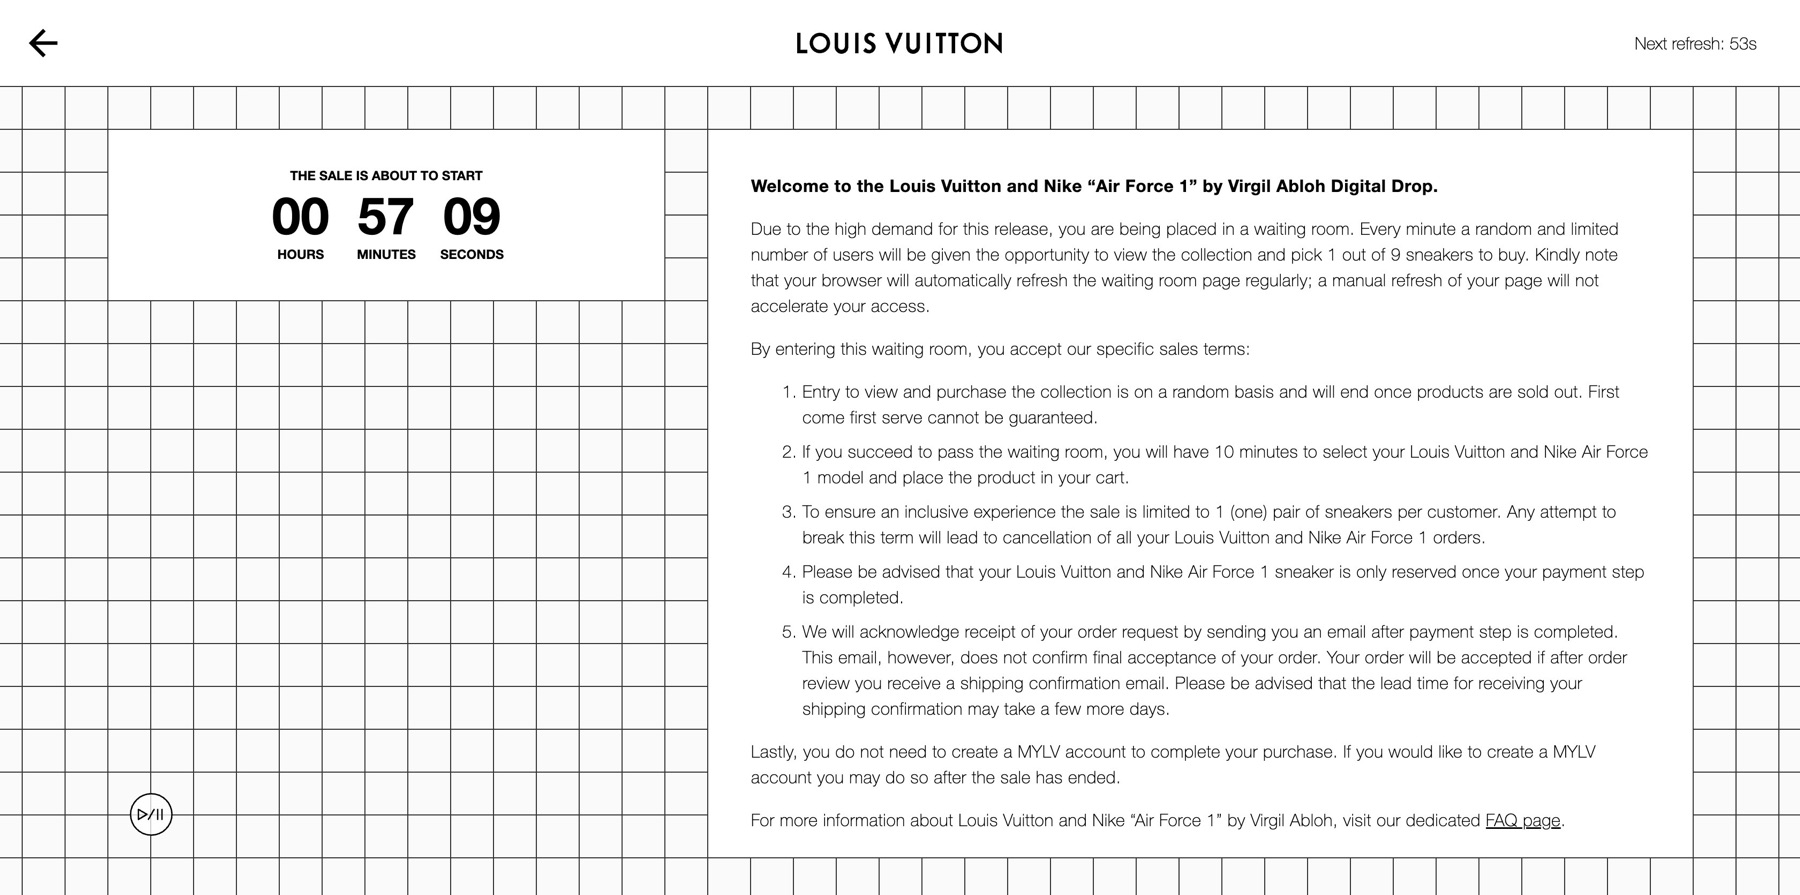 J23 iPhone App on X: Welcome to the Louis Vuitton and Nike “Air